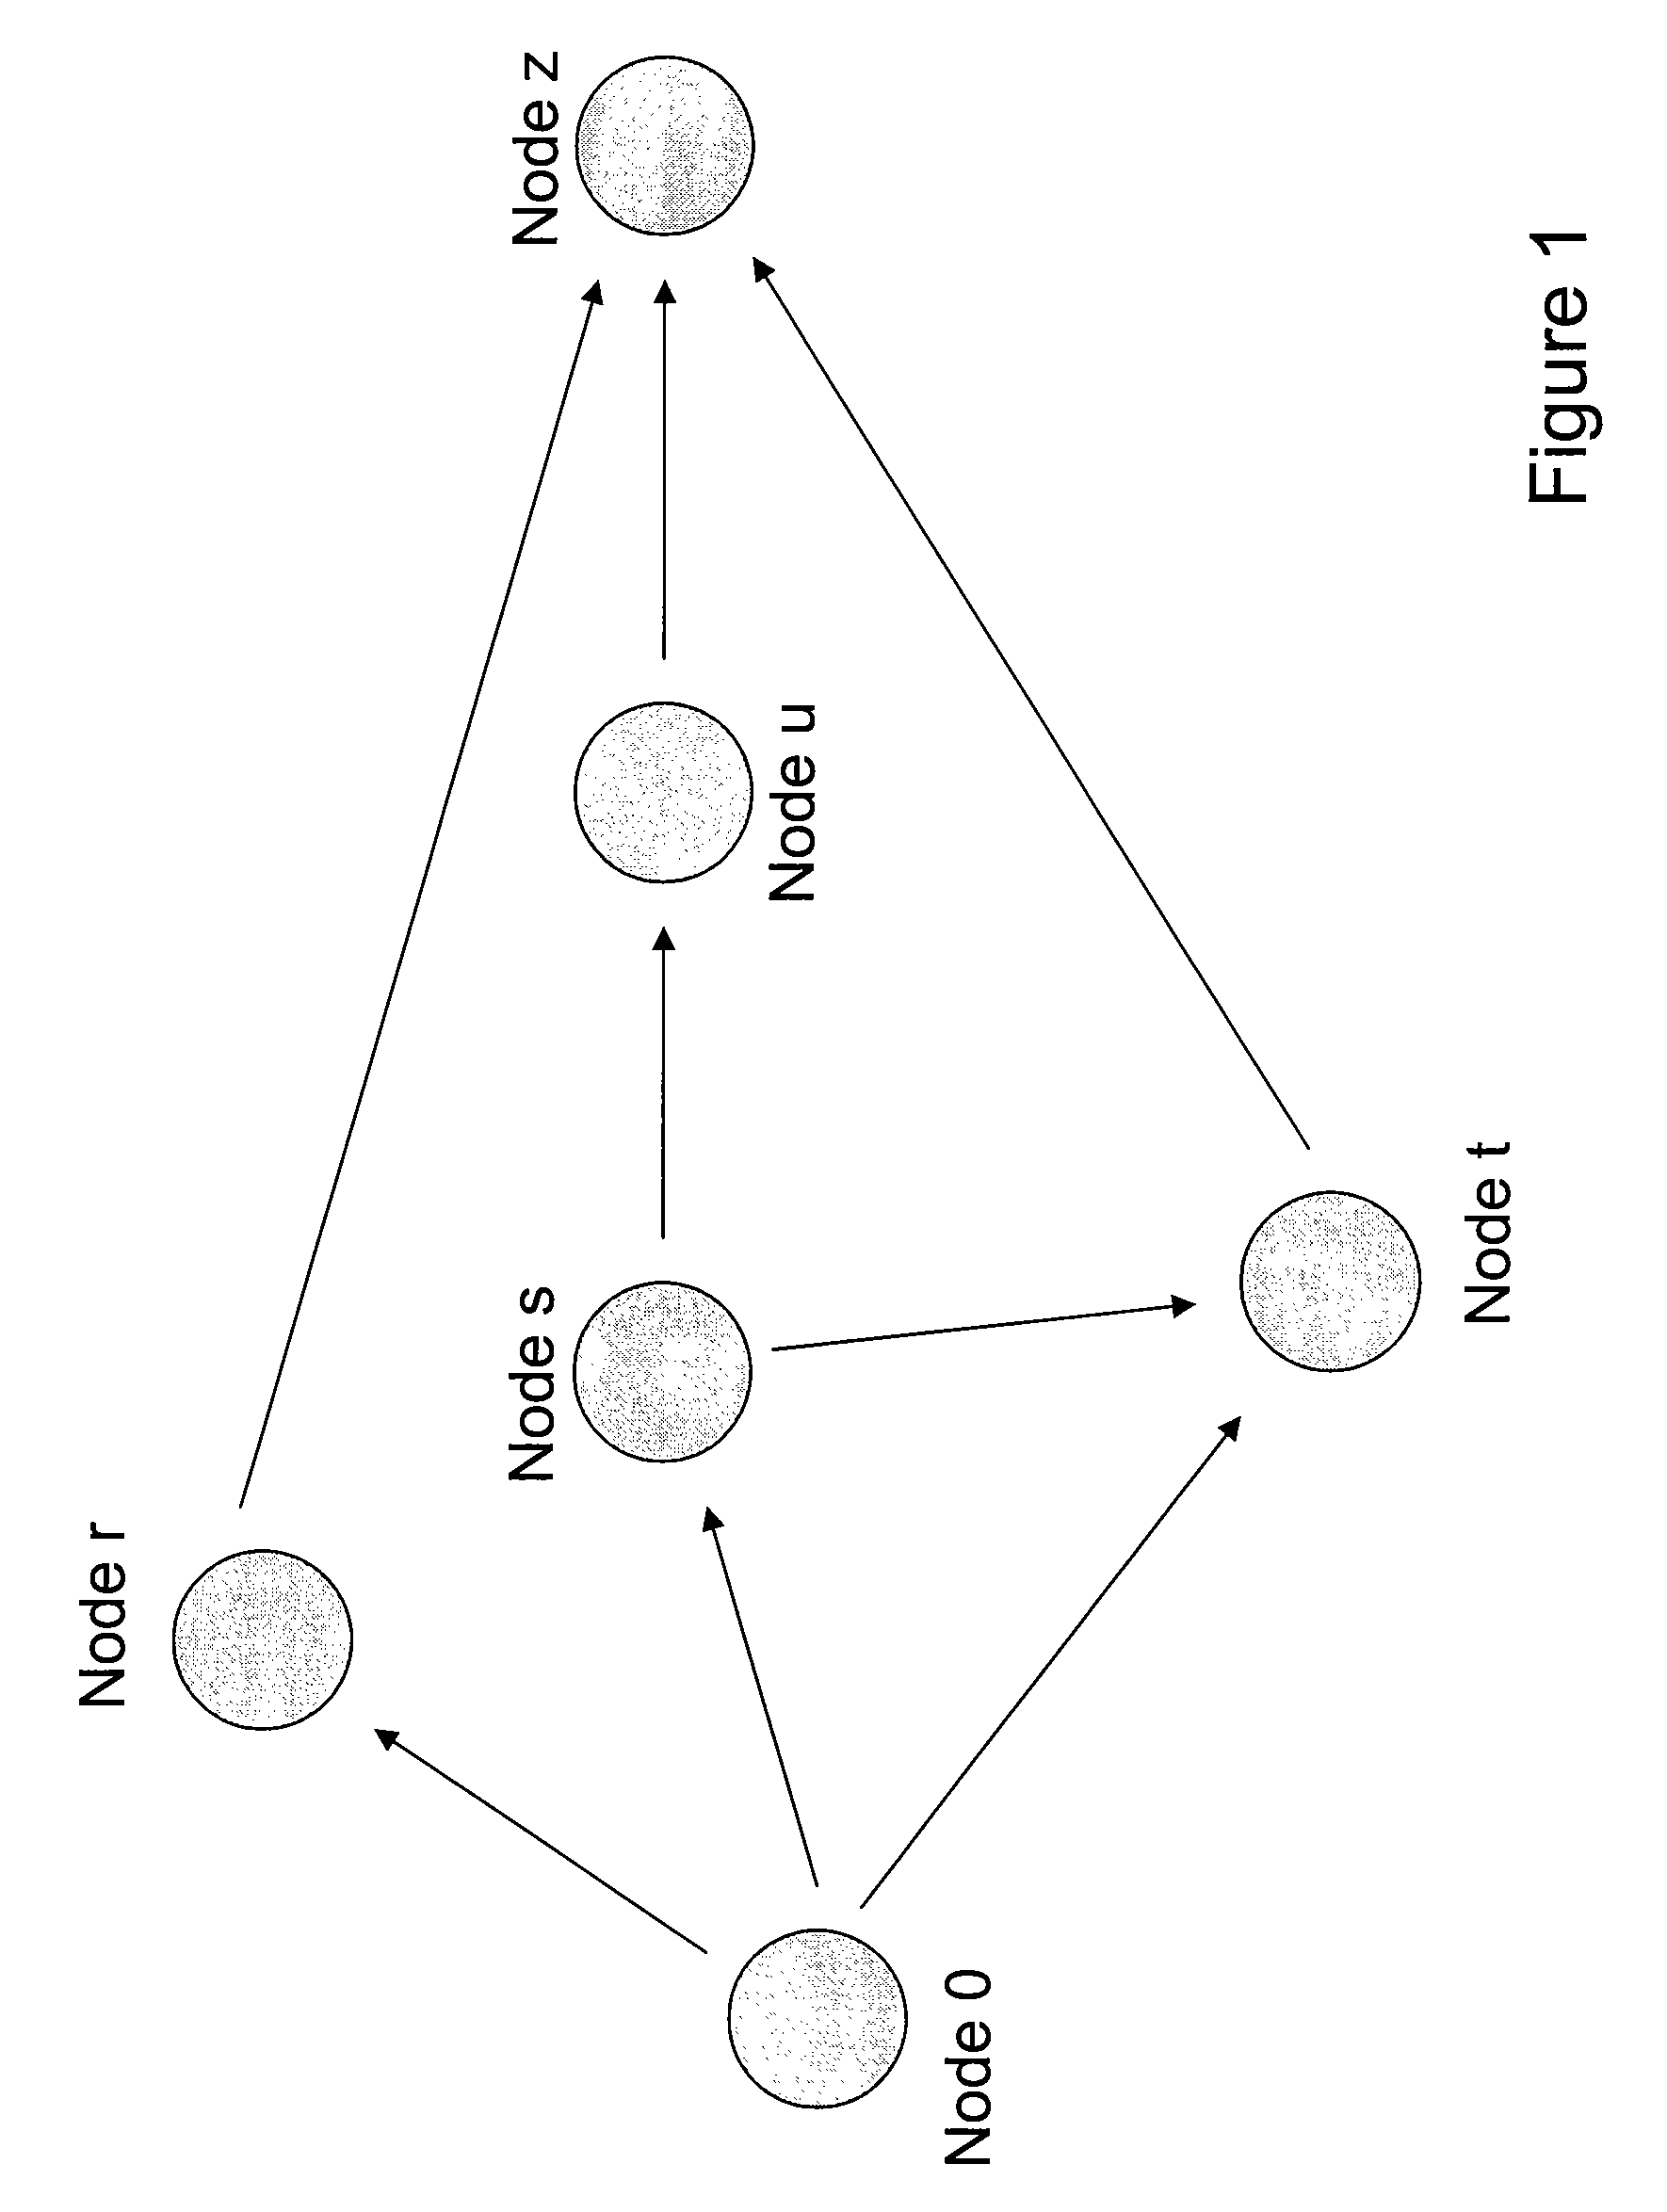 Iterative decoding in a mesh network, corresponding method and system